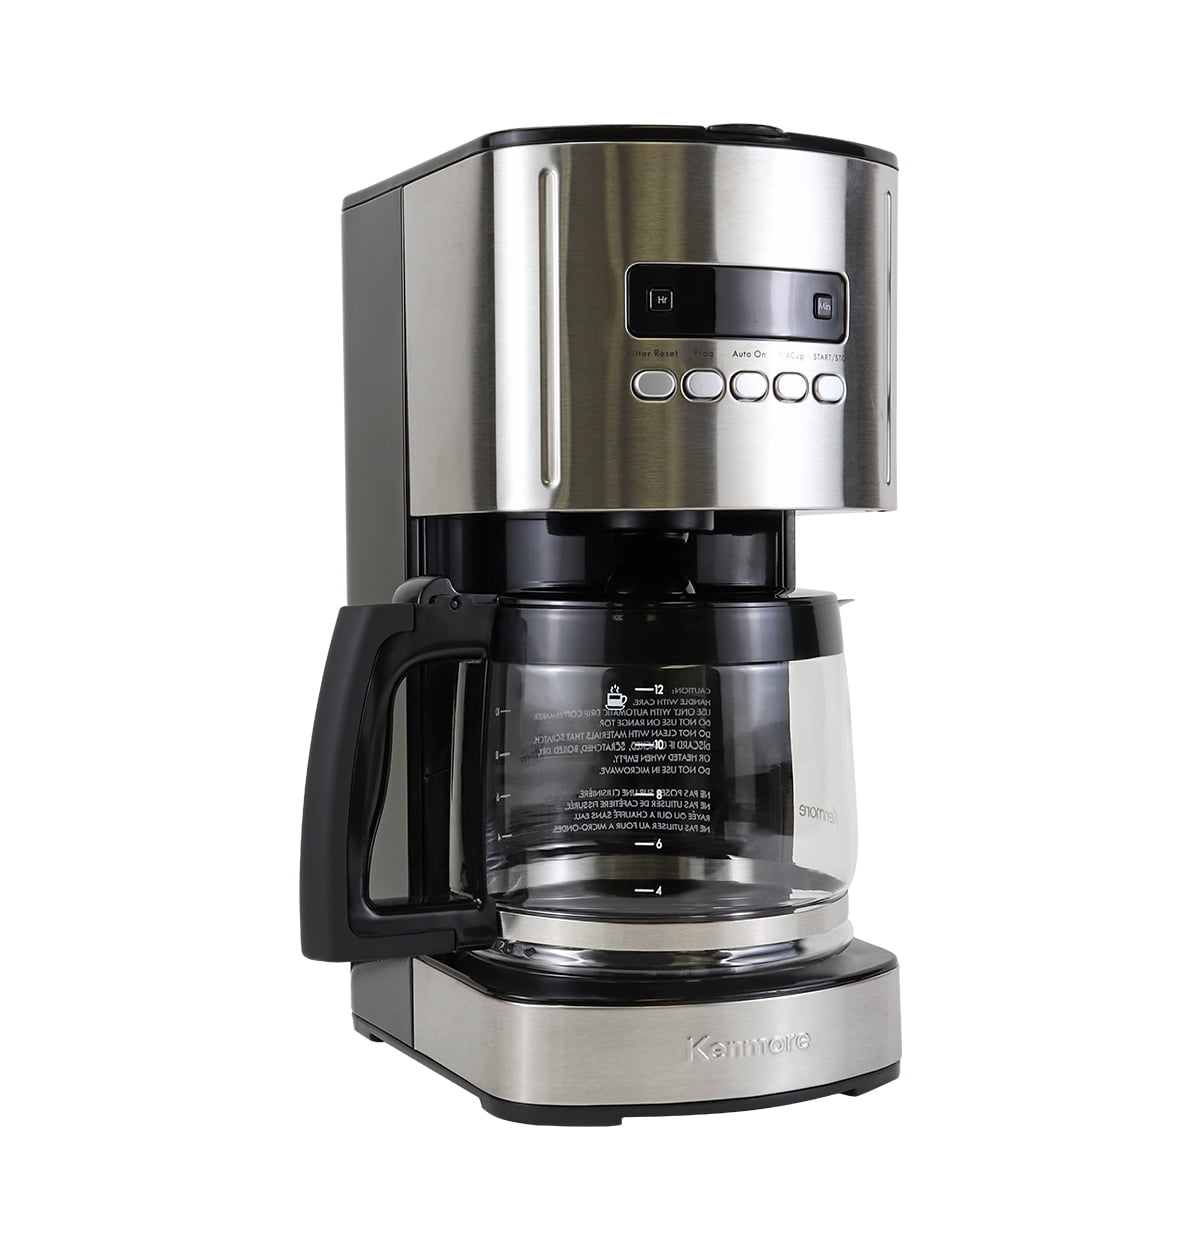 Kenmore Aroma 12 Cup Coffee and Stainless Steel, Programmable Timer, Reusable Cone - Walmart.com